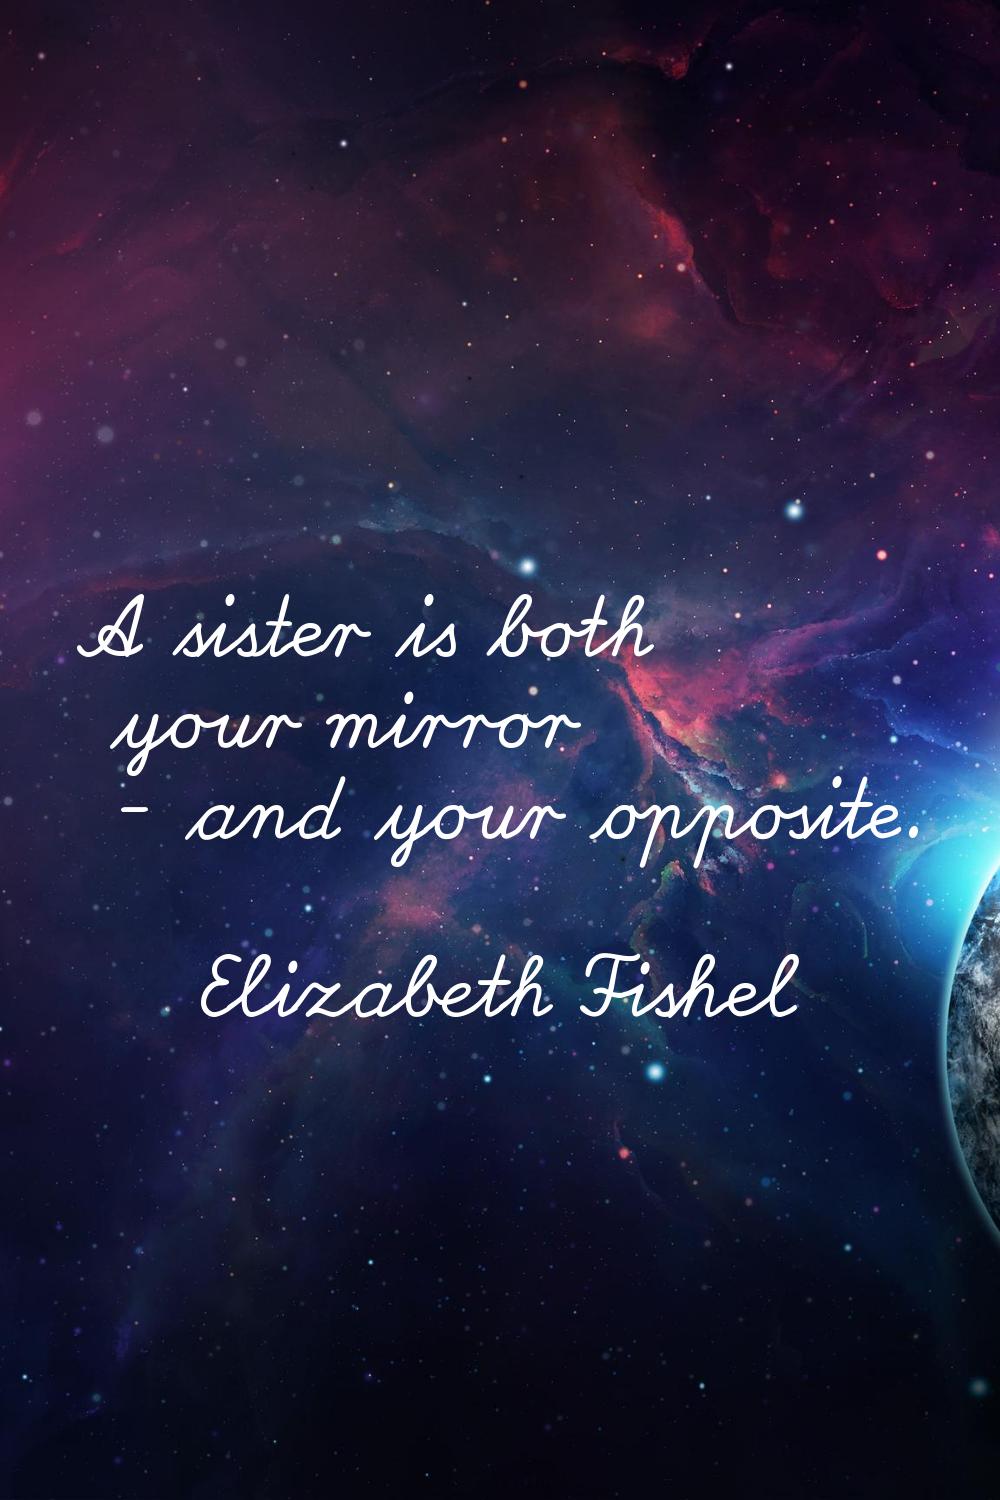 A sister is both your mirror - and your opposite.